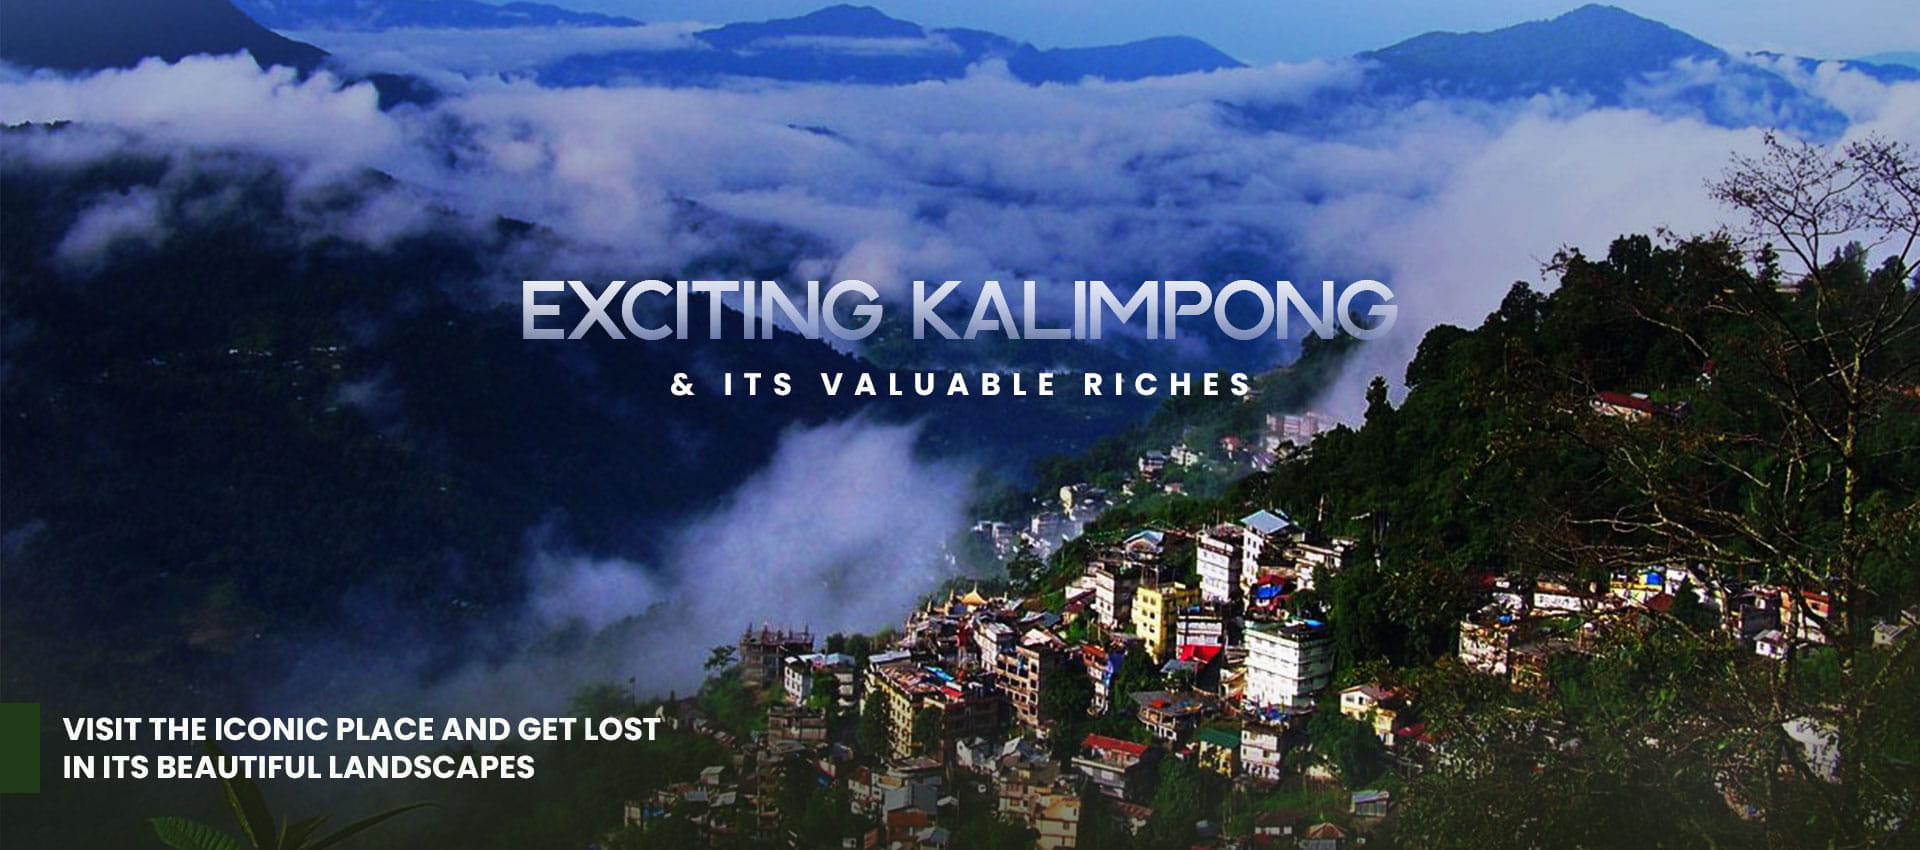 Exciting Kalimpong and its valuable riches